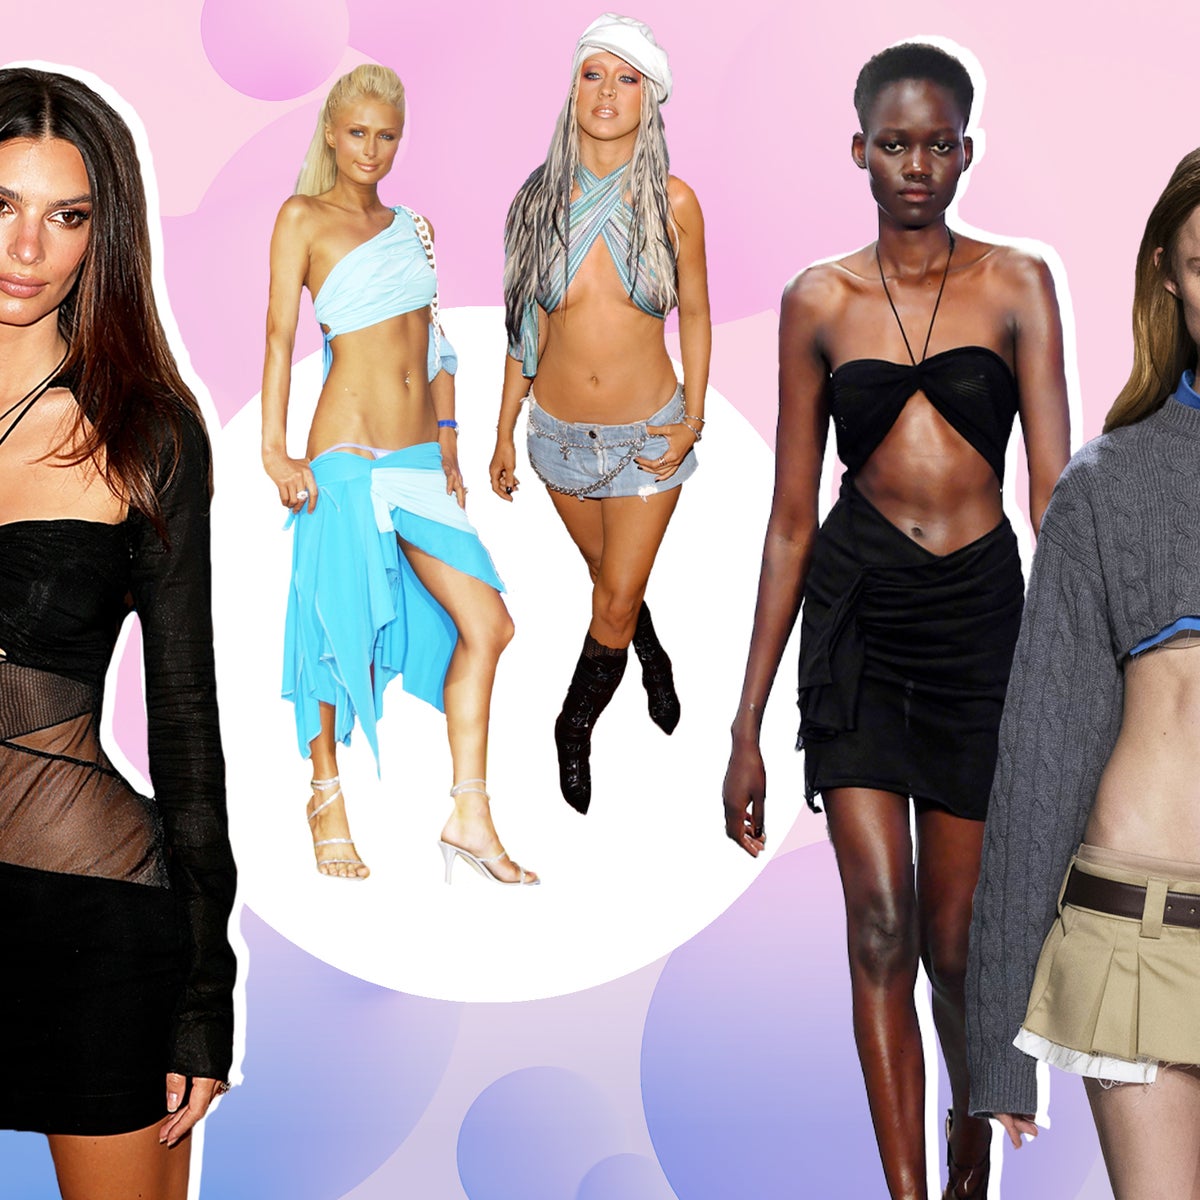 Could the rise of Y2K fashion trigger a return to size zero